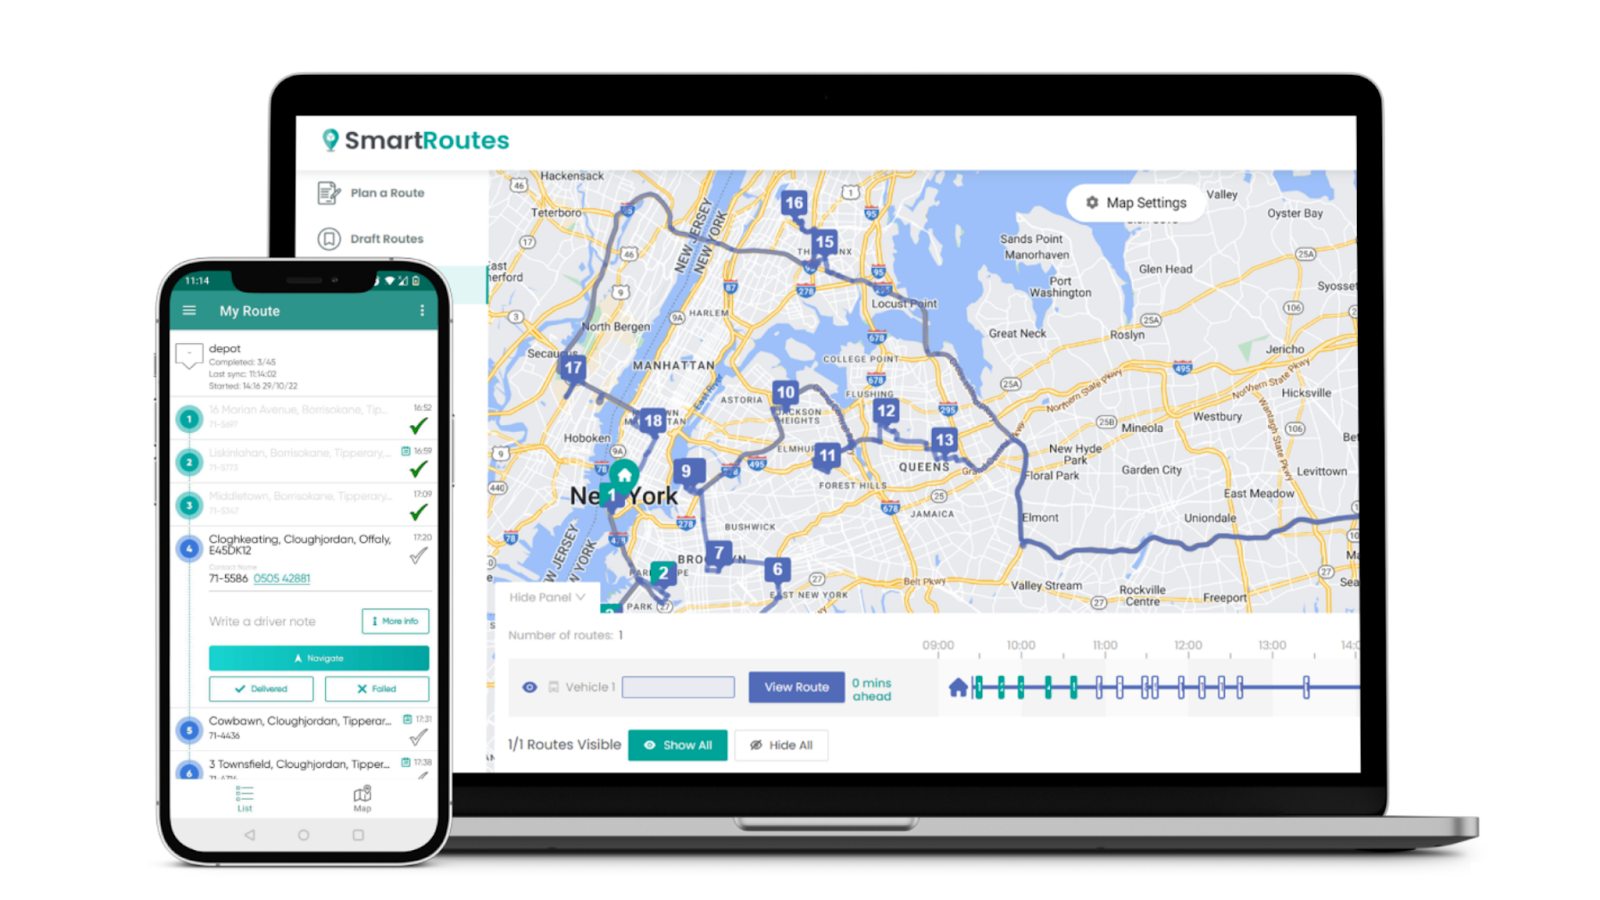 SmartRoutes' user interface on desktop and mobile